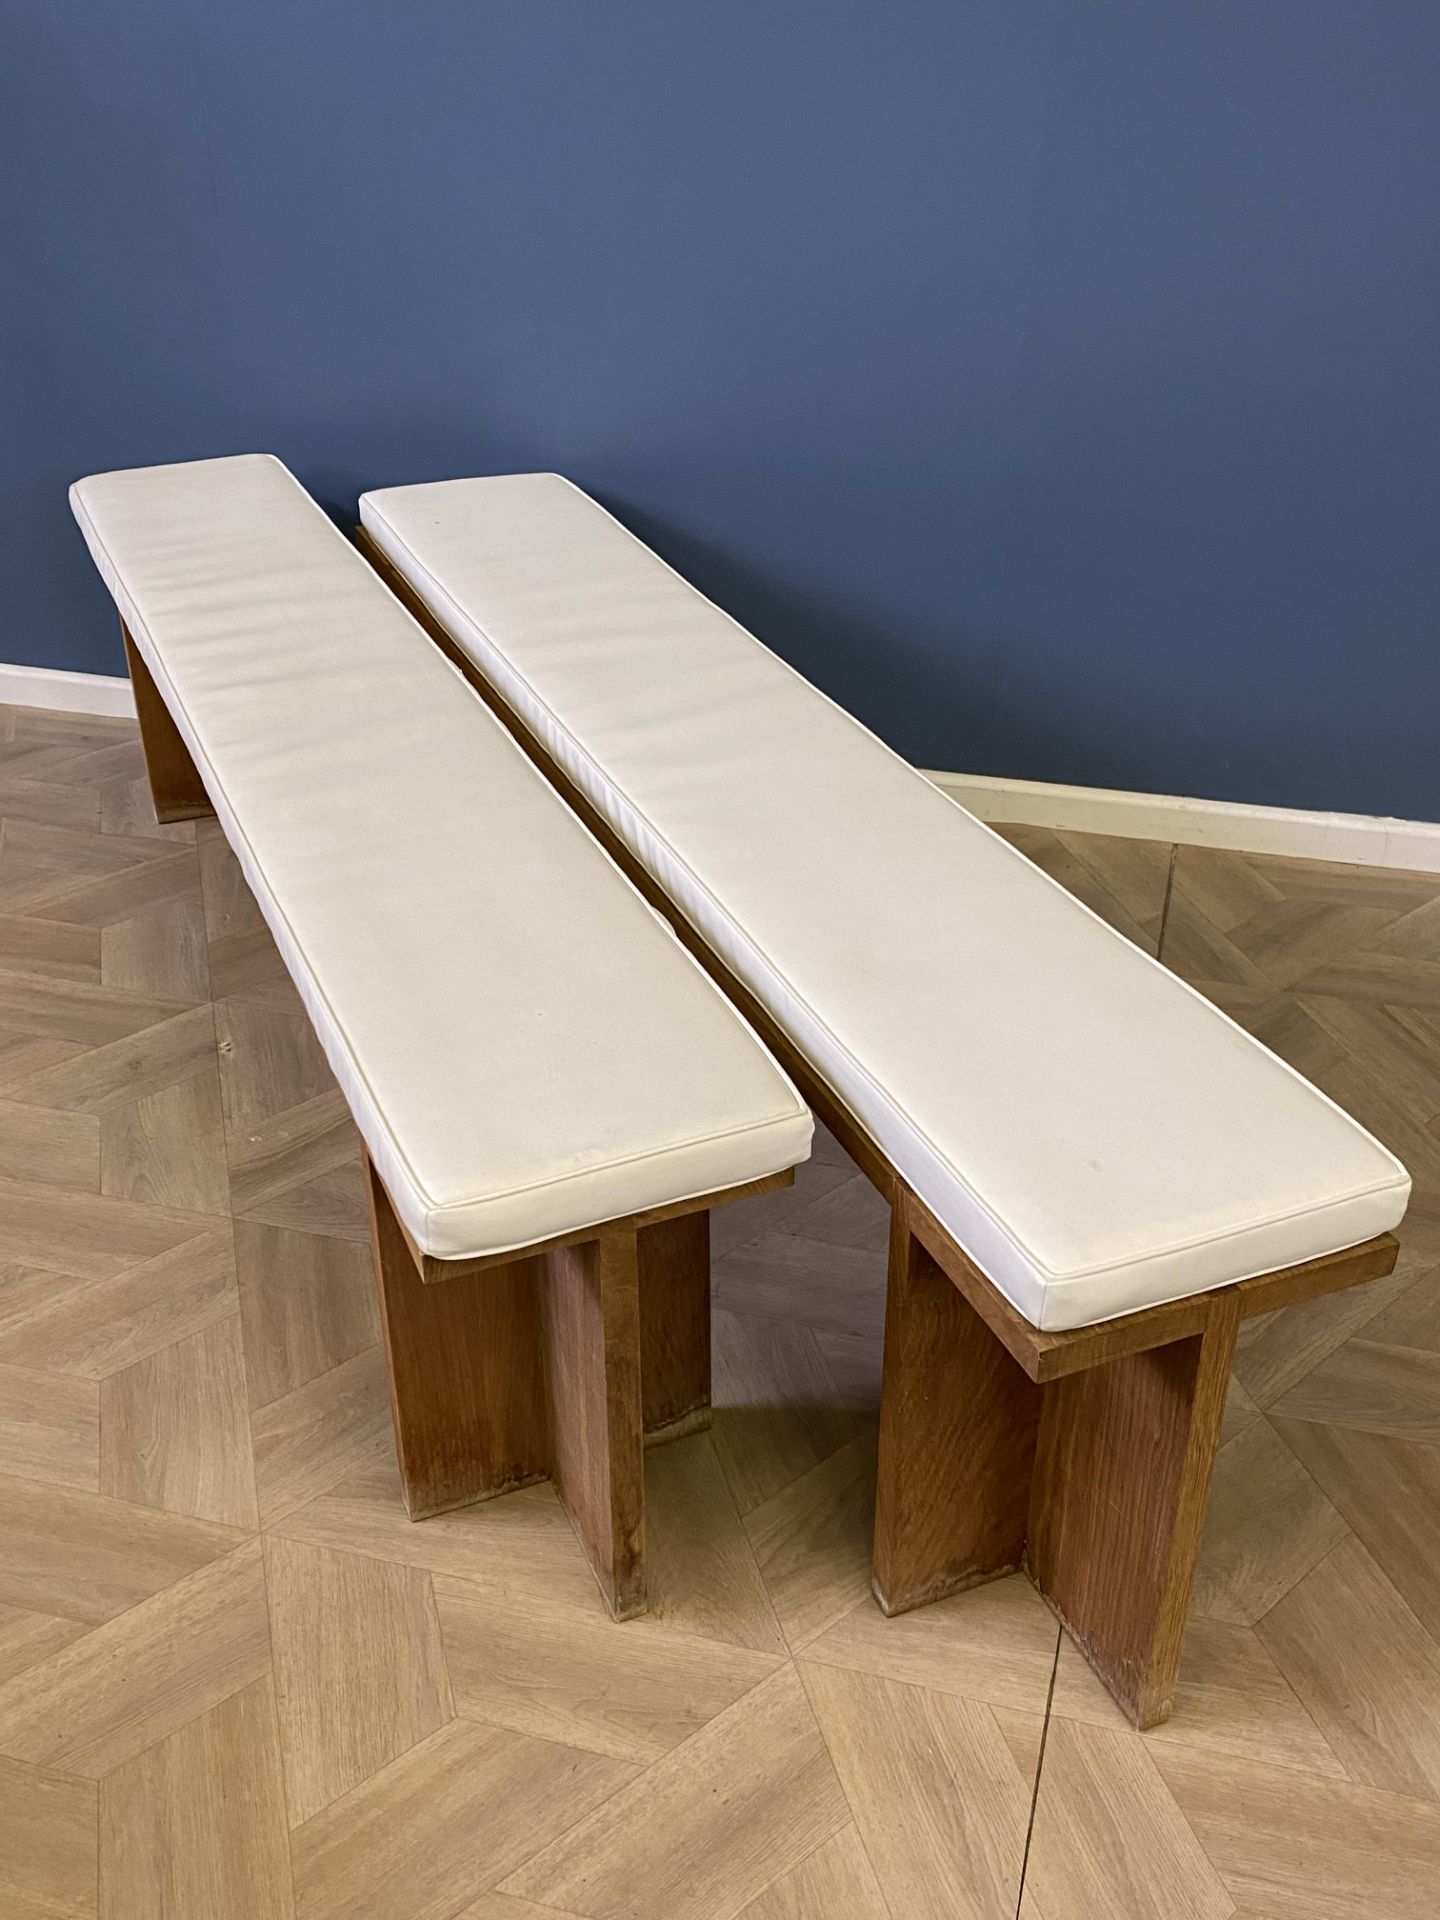 Pair of solid oak pool benches - Image 2 of 7